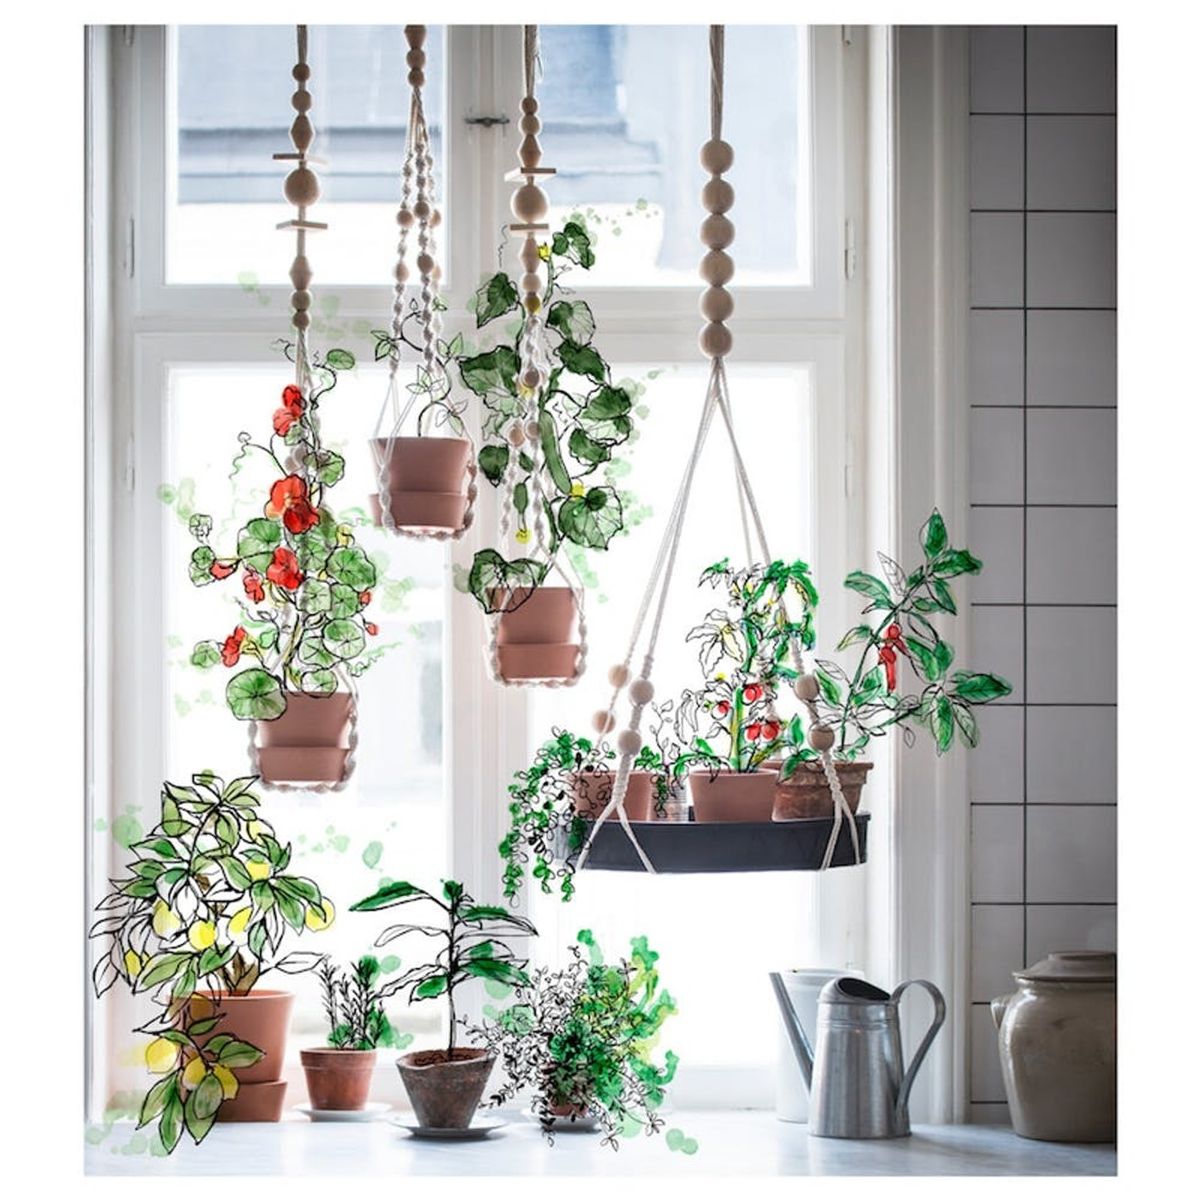 15 IKEA Hacks for the Plants in Your Life